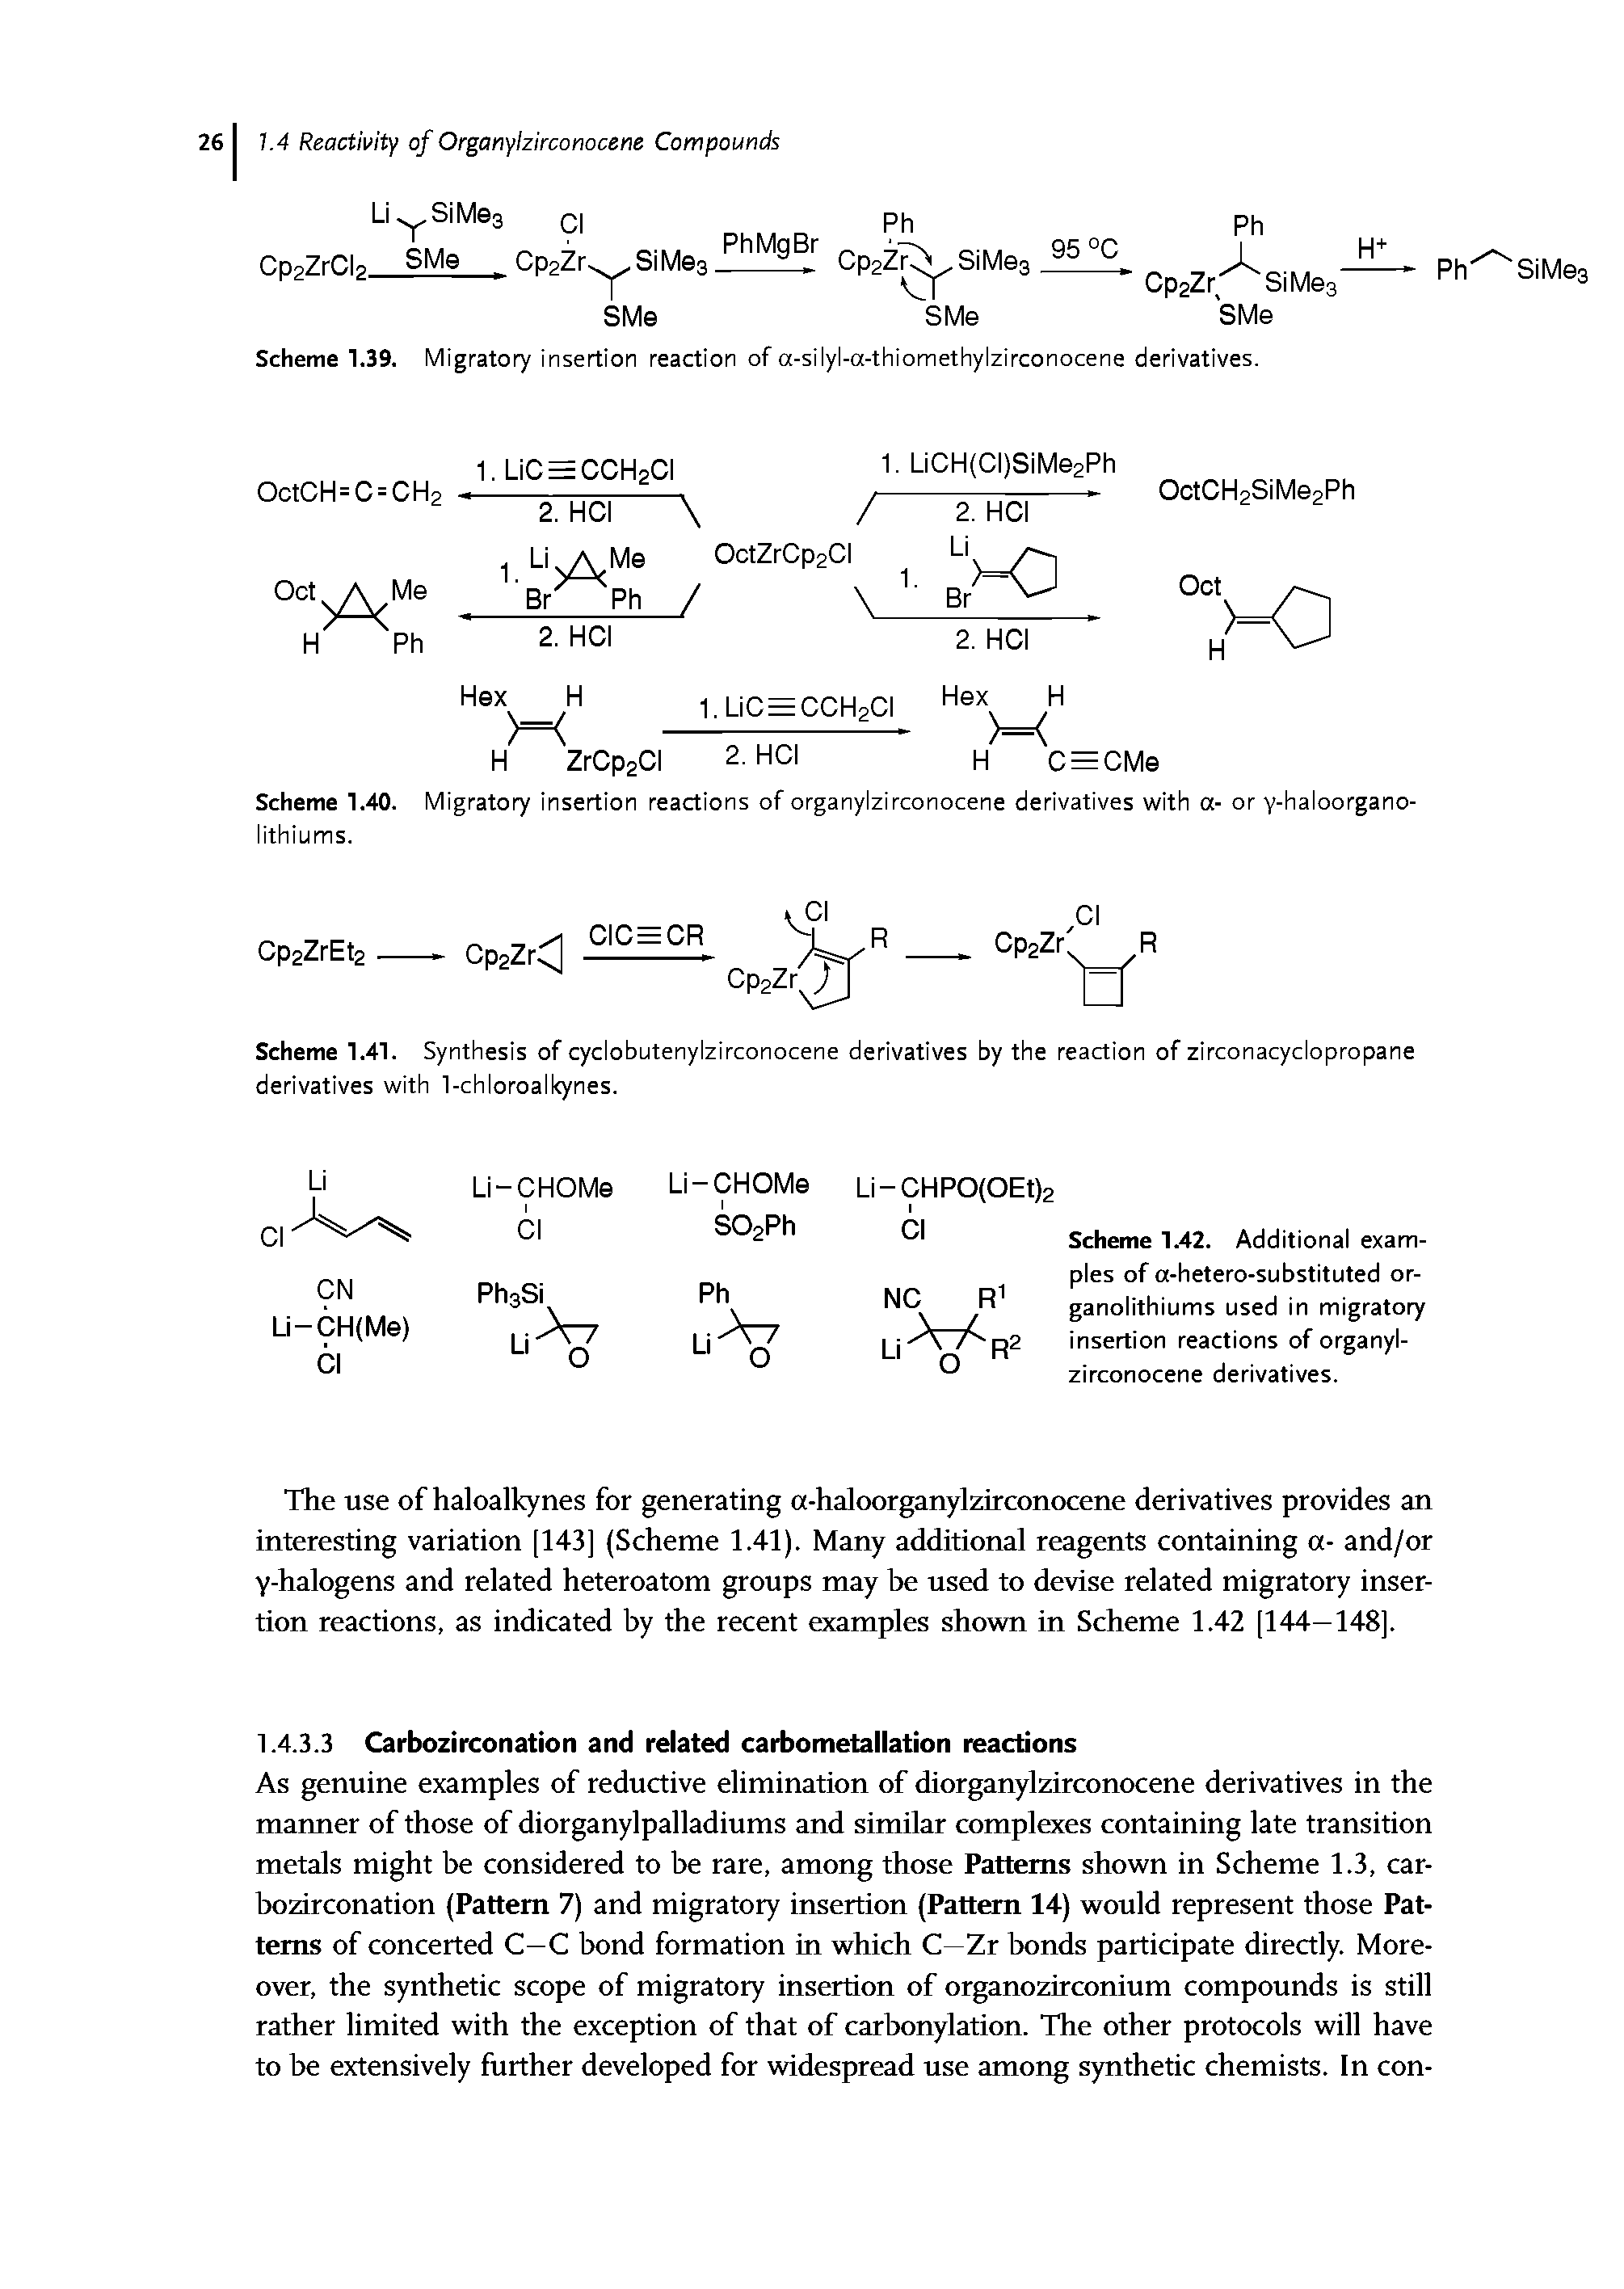 Scheme 1.40. Migratory insertion reactions of organyizirconocene derivatives with a- or y-haloorgano-lithiums.